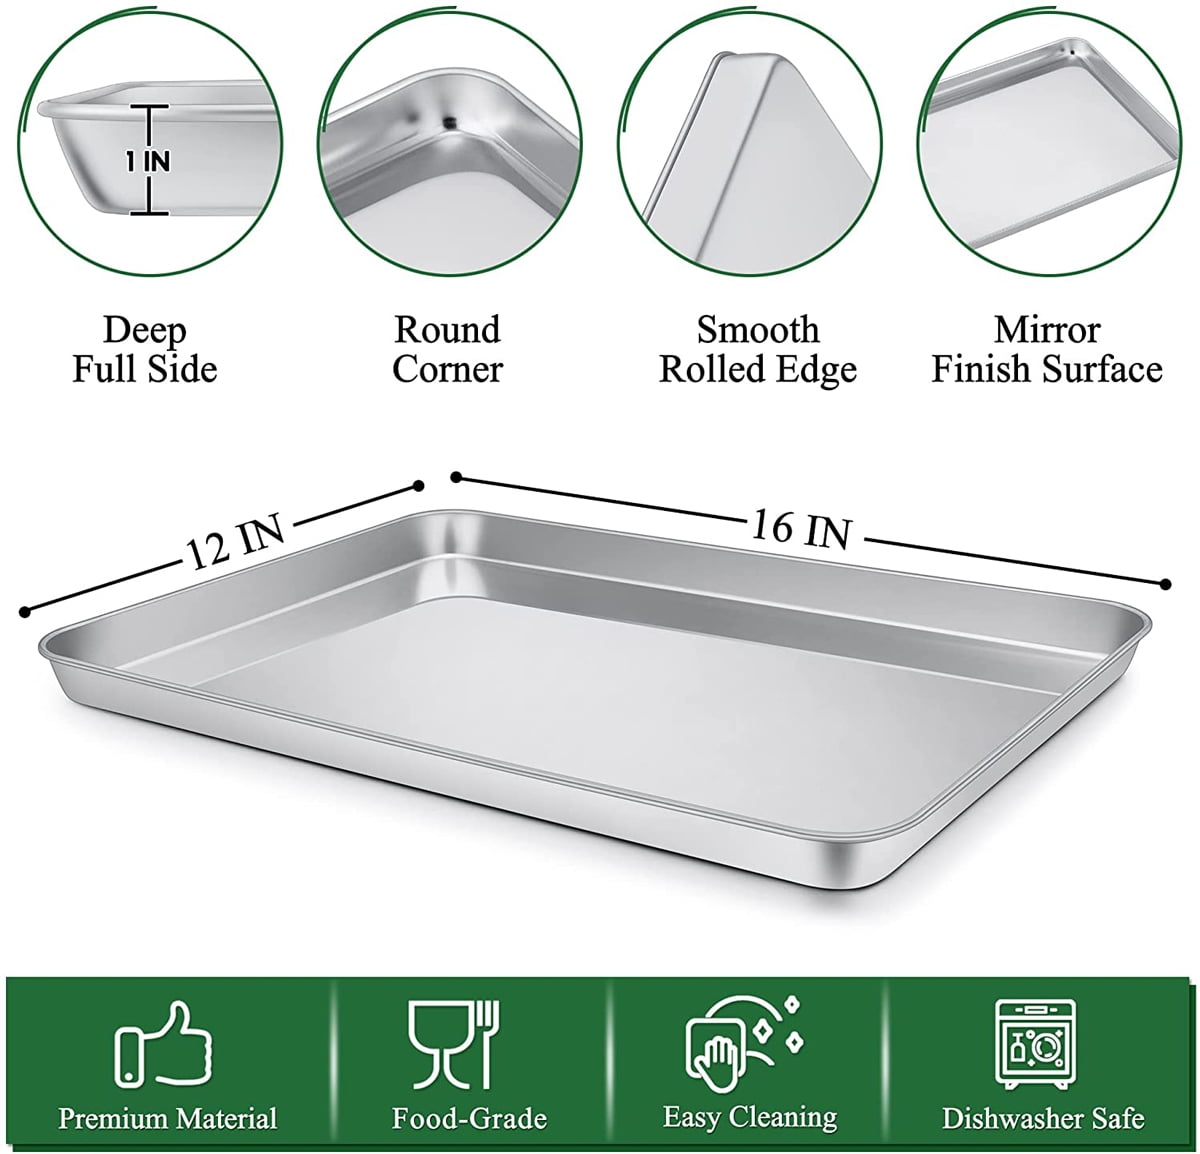 Zacfton Baking Sheets and Rack Set, Cookie Pan with Nonstick Cooling Rack & Cookie Sheets Rectangle Size 12 x 10 x 1 inch,Stainless Steel & Non Toxic